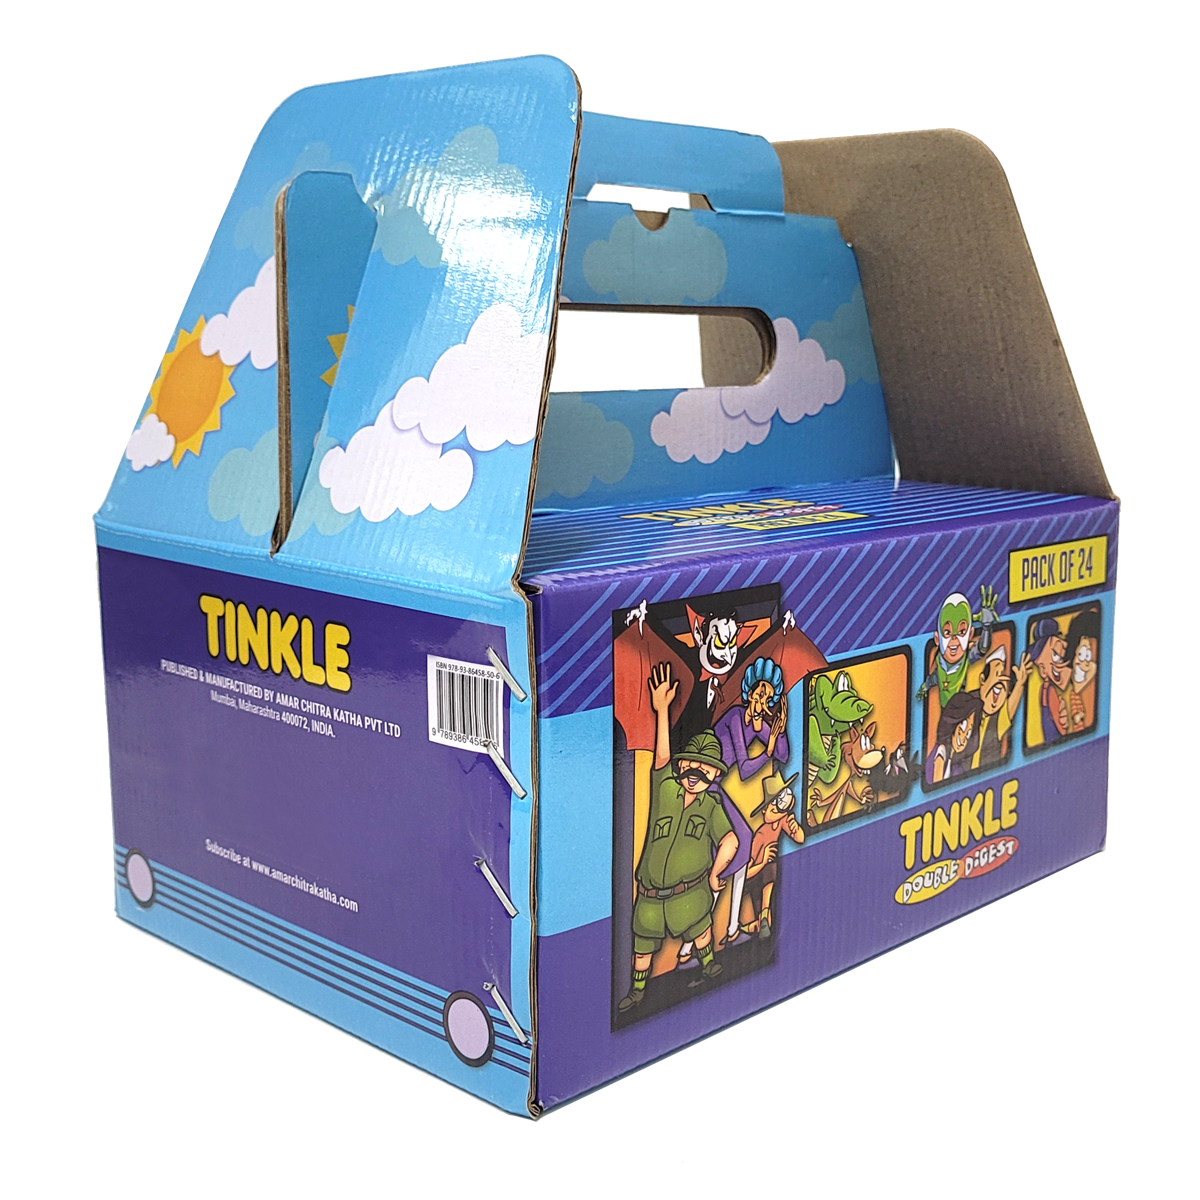 Tinkle Digest: Assorted Pack of 24